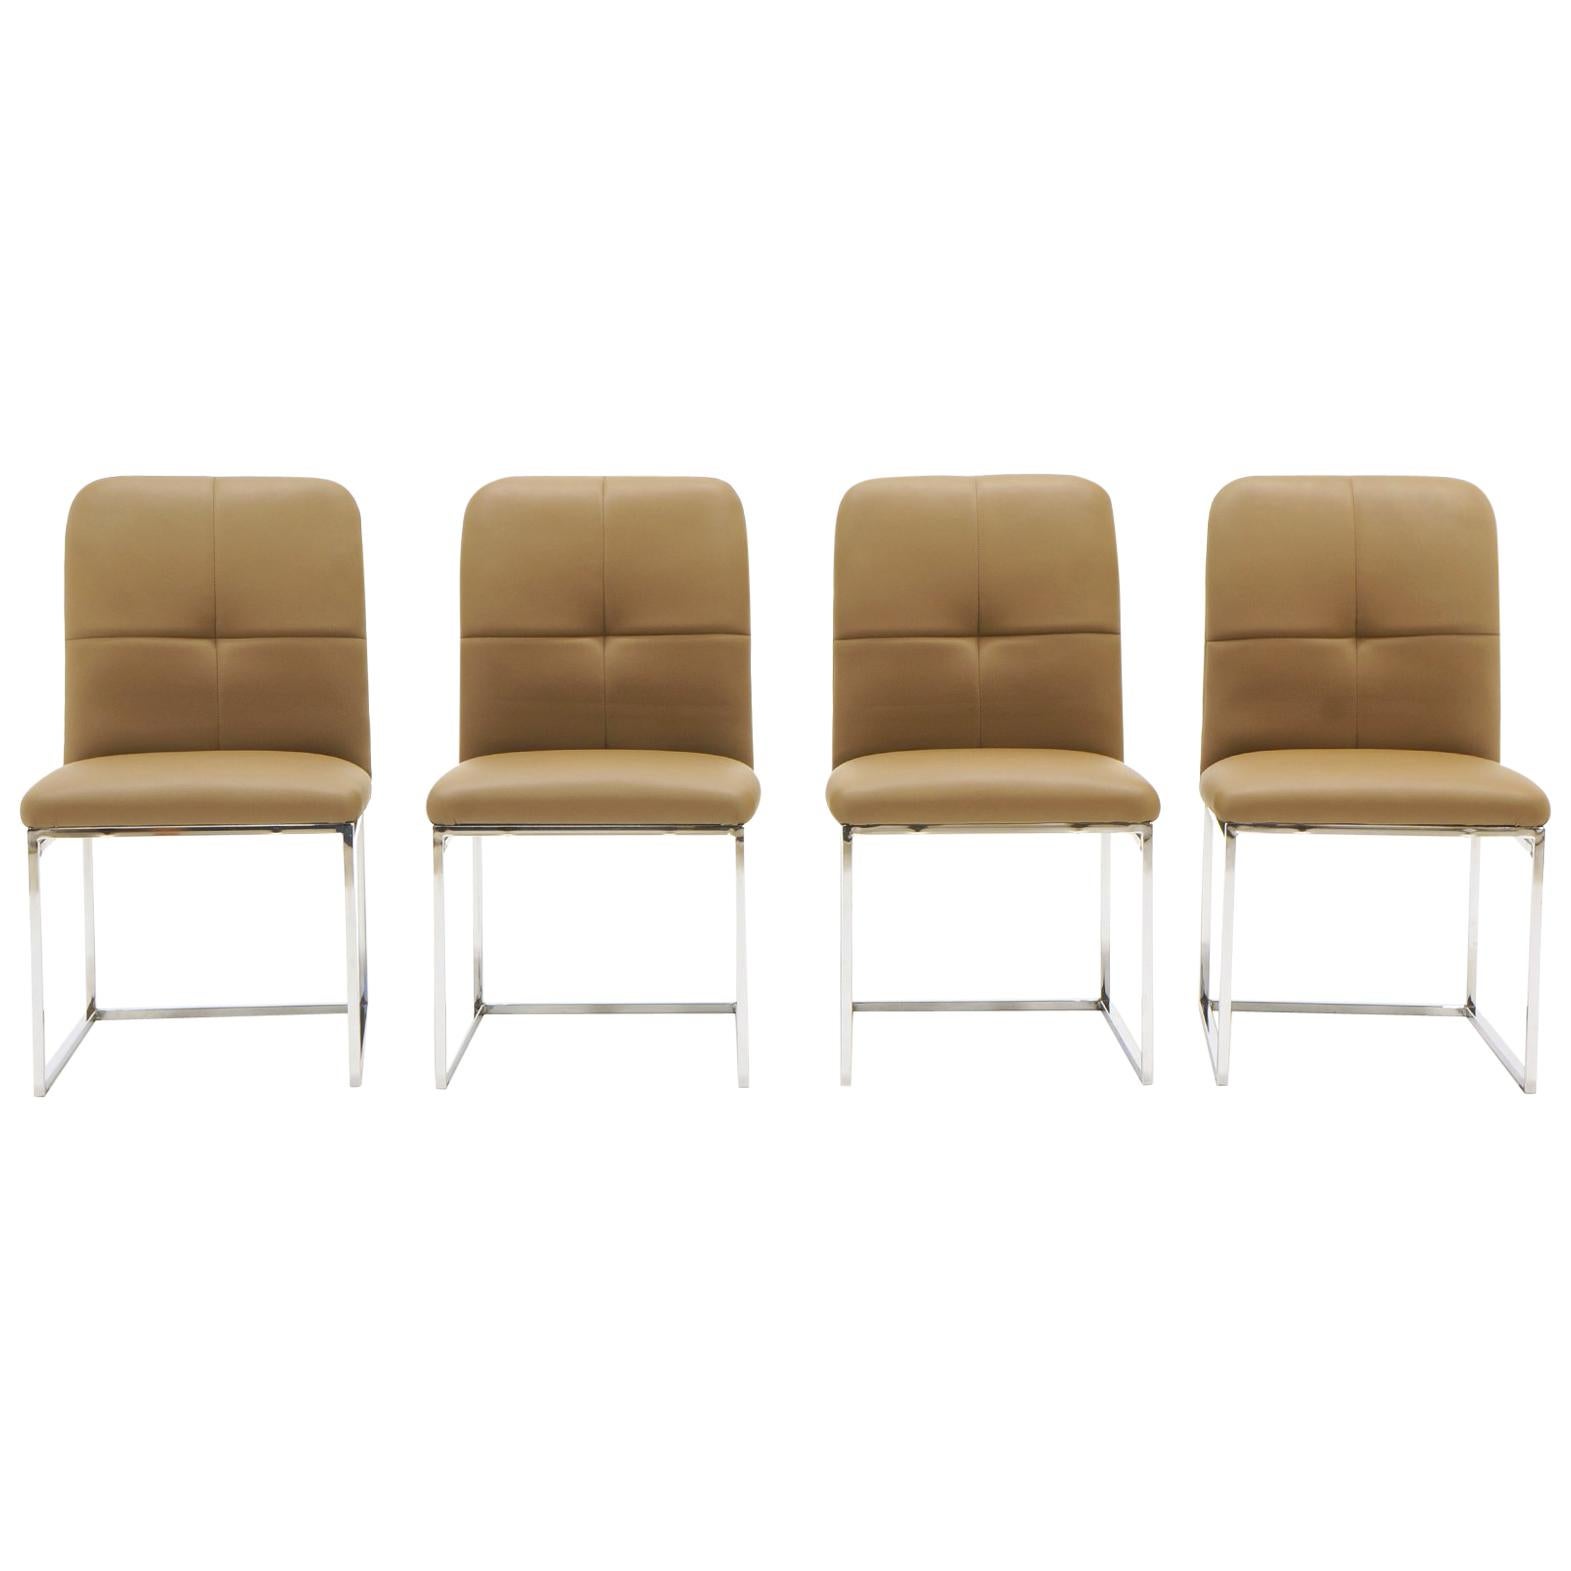 Milo Baughman Dining Chairs, Set of Four, Chrome and Tan Leather